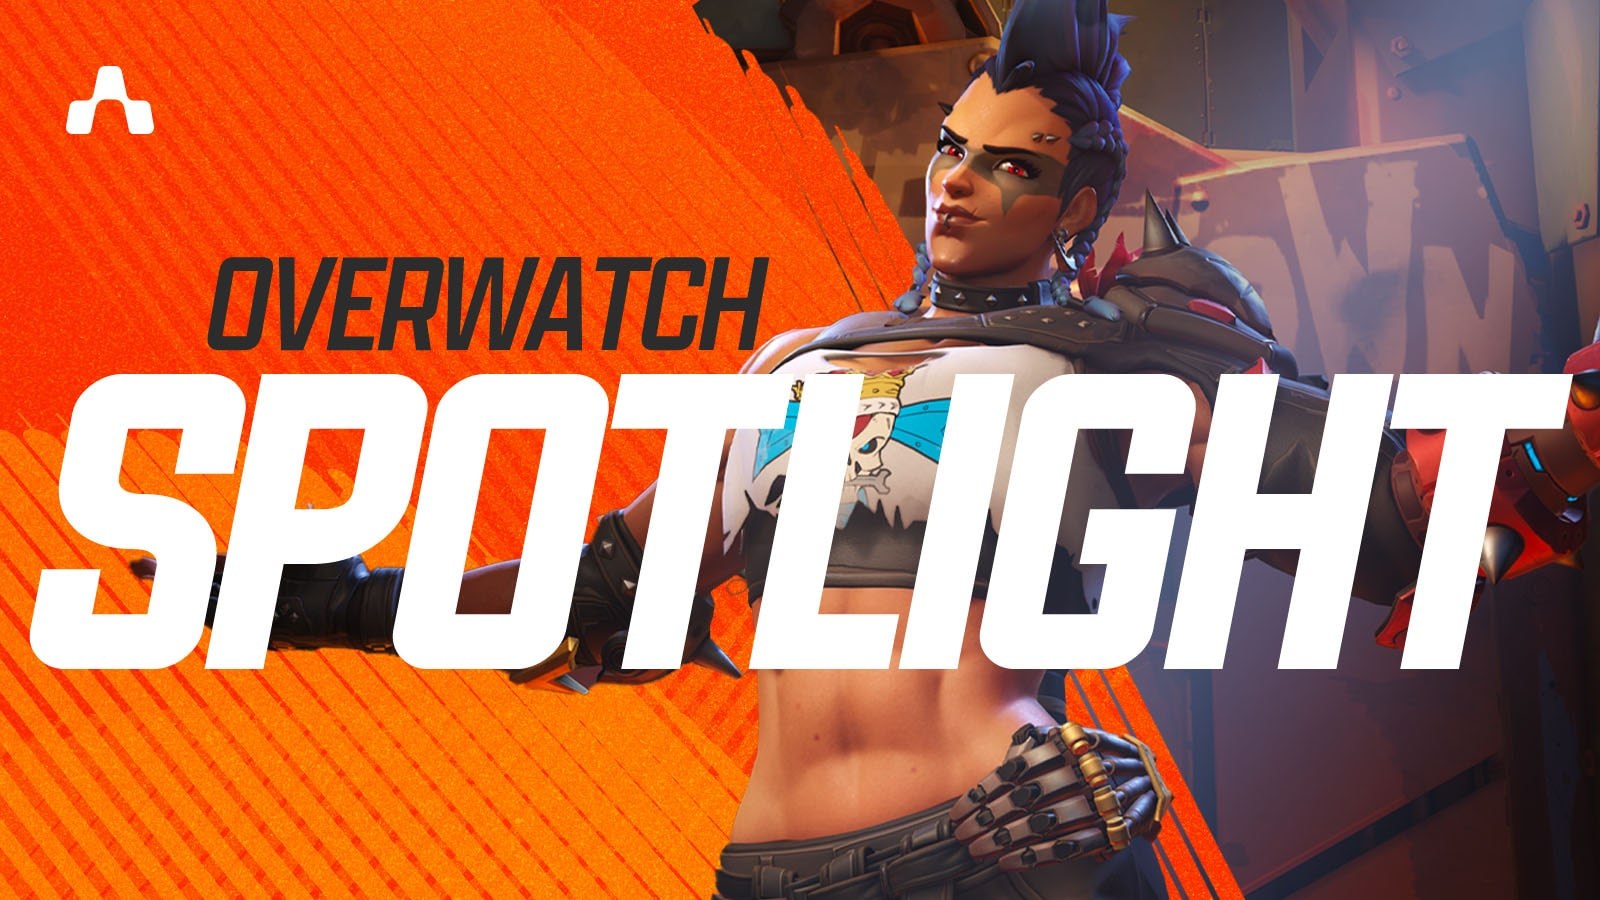 A graphic featuring 'Overwatch' tank Junker Queen with the words "Overwatch Spotlight" stylized in orange and white.